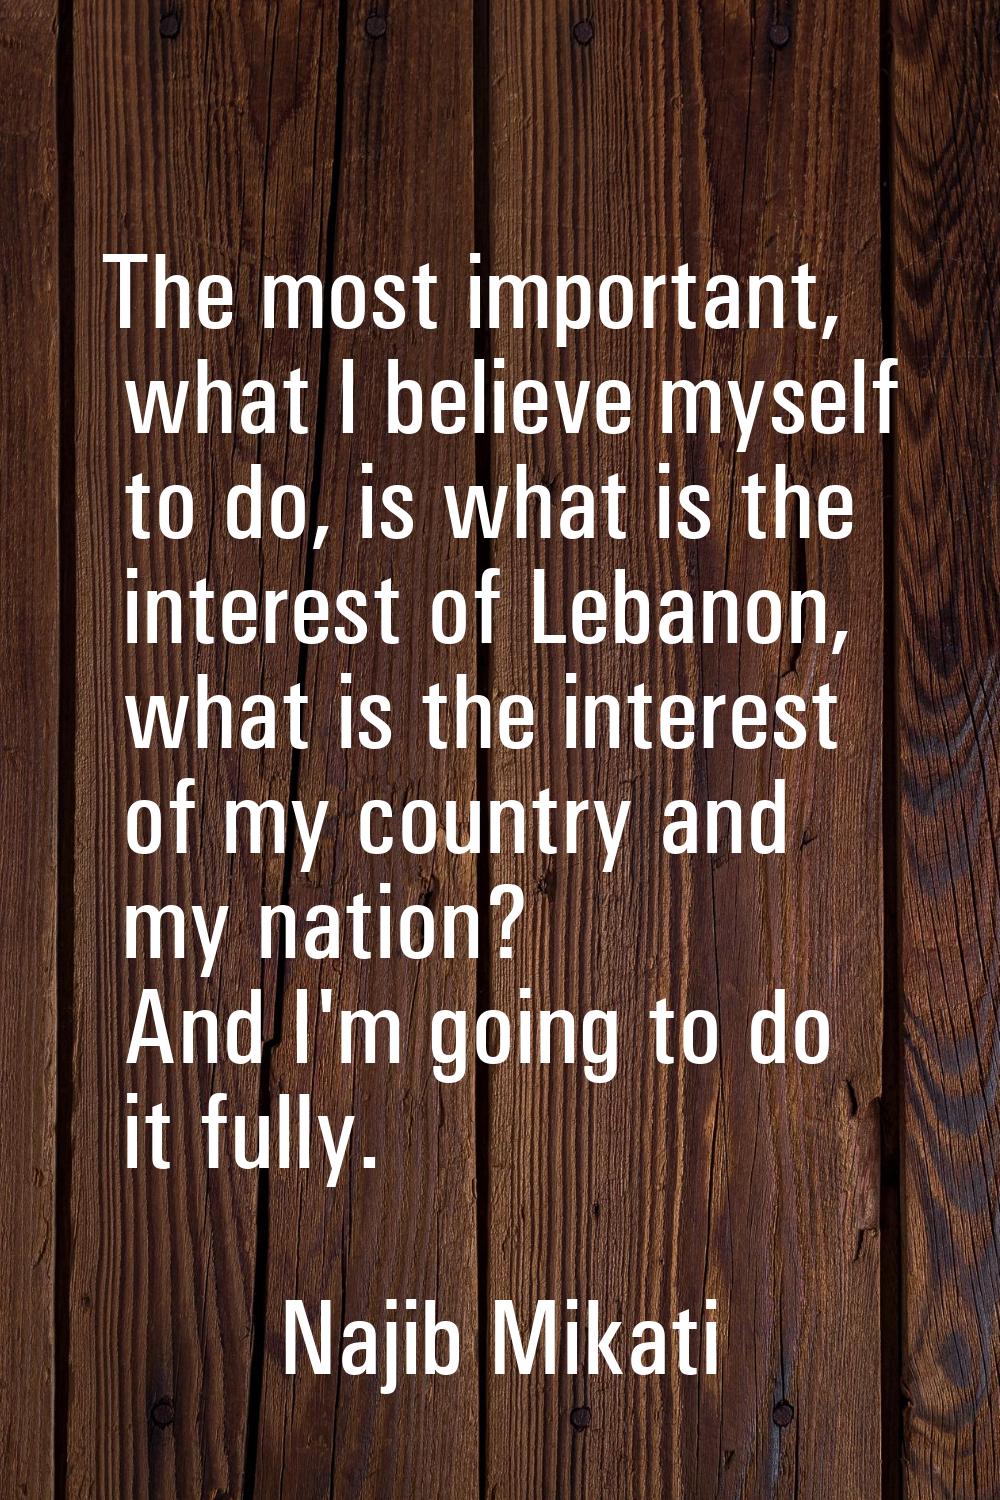 The most important, what I believe myself to do, is what is the interest of Lebanon, what is the in